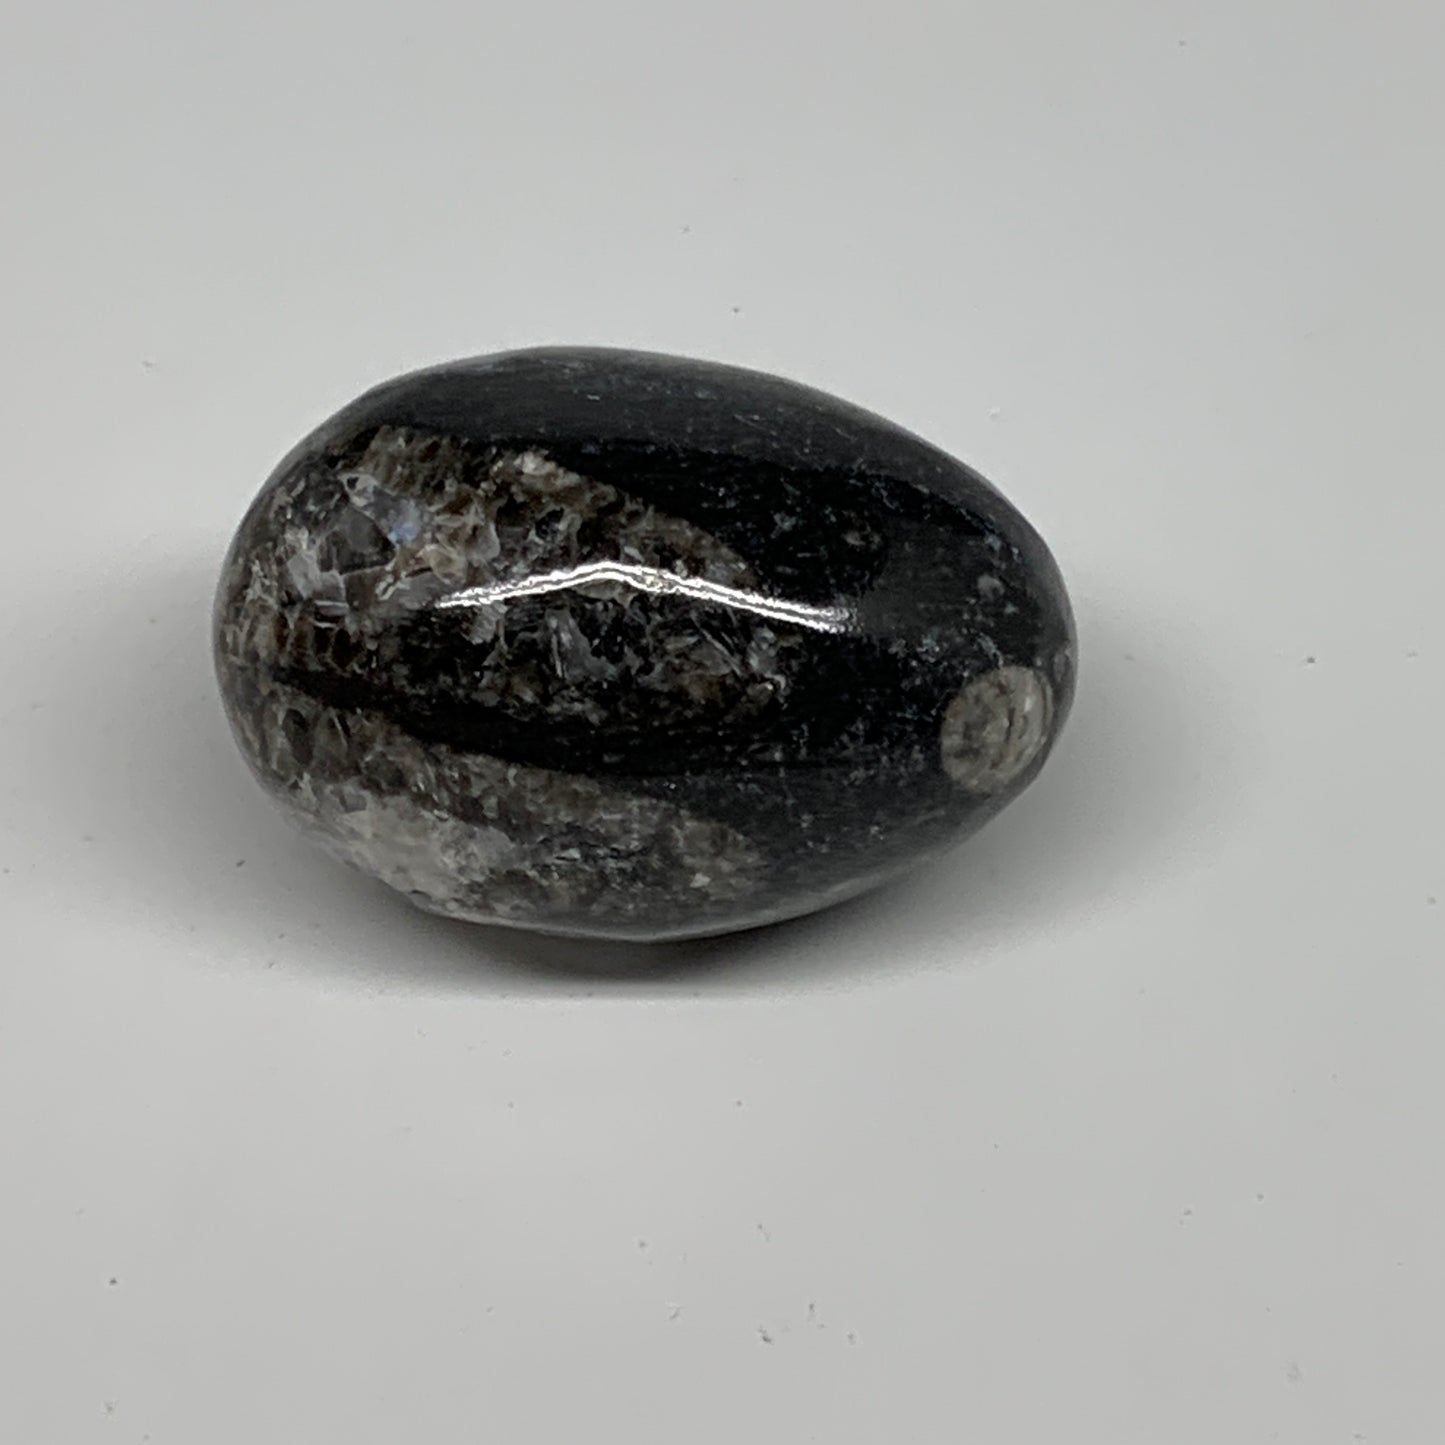 90.9g, 2"x1.3", Natural Fossil Orthoceras Stone Egg from Morocco, B31062